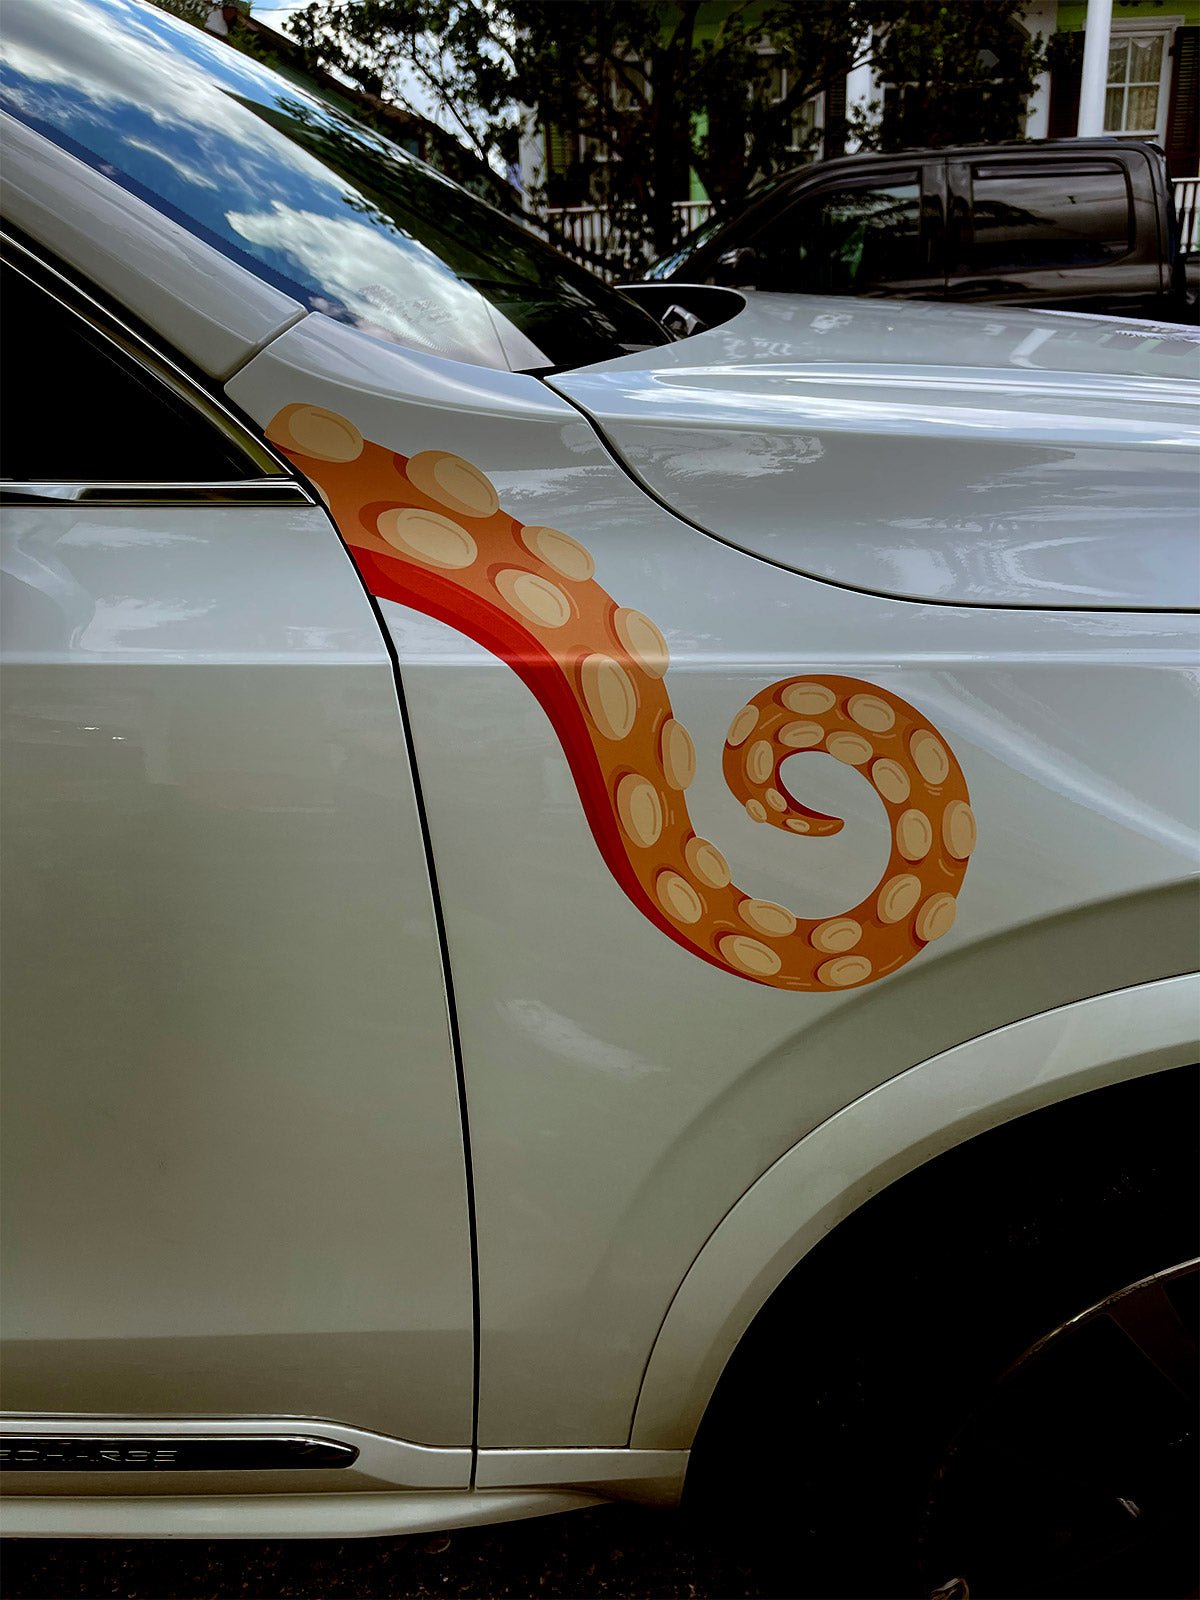 A silver car with Eight Terrifying Tentacle Decals by Cover-Alls, featuring a decorative red and orange giant squid tentacle design on the door, parked on a street.